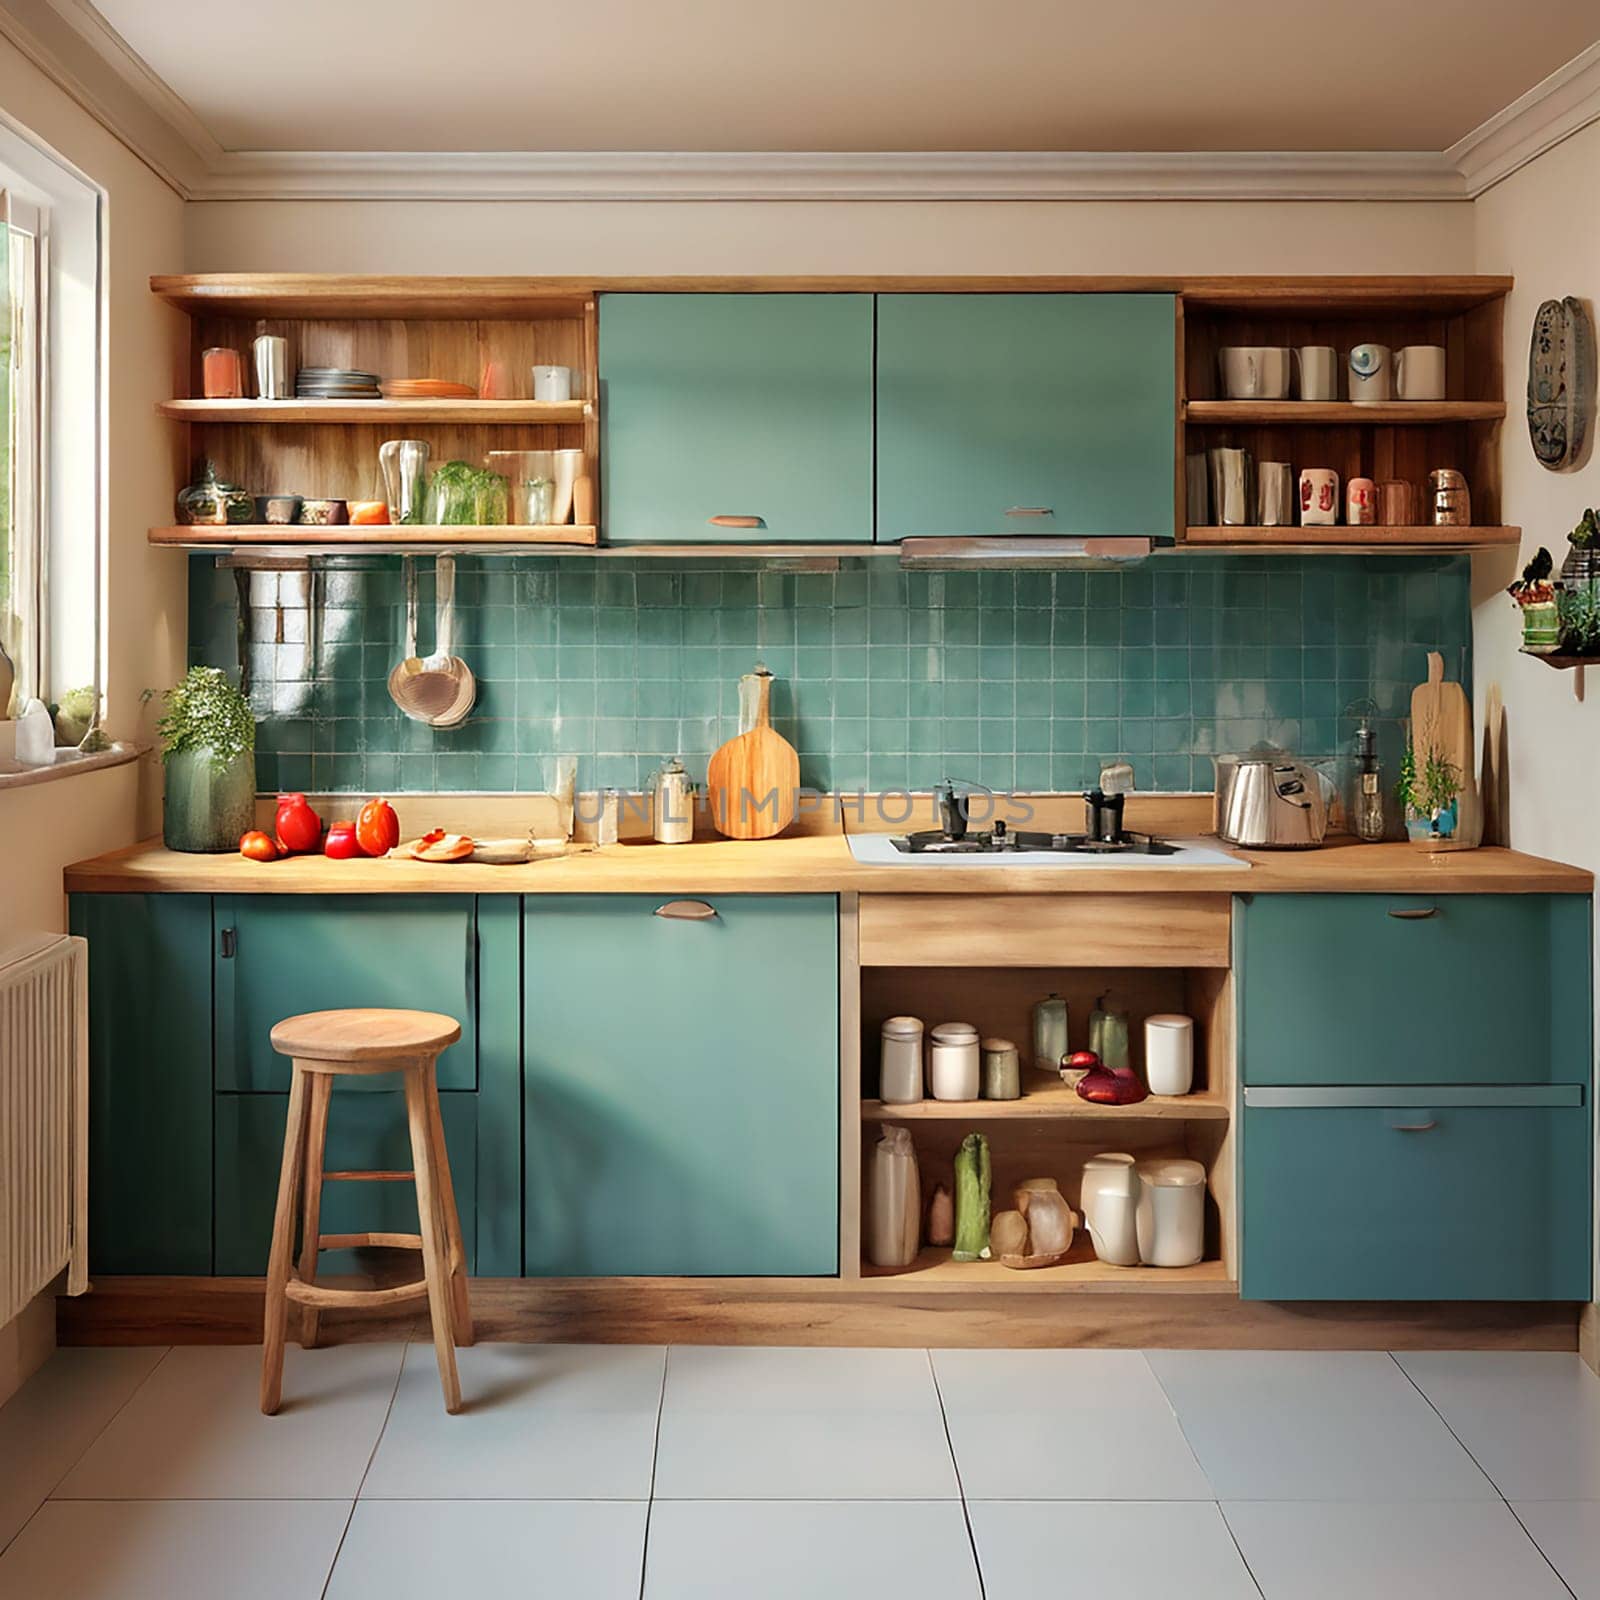 Choosing the Perfect Kitchen Furniture: Cabinets, Tables, and Chairs by Petrichor